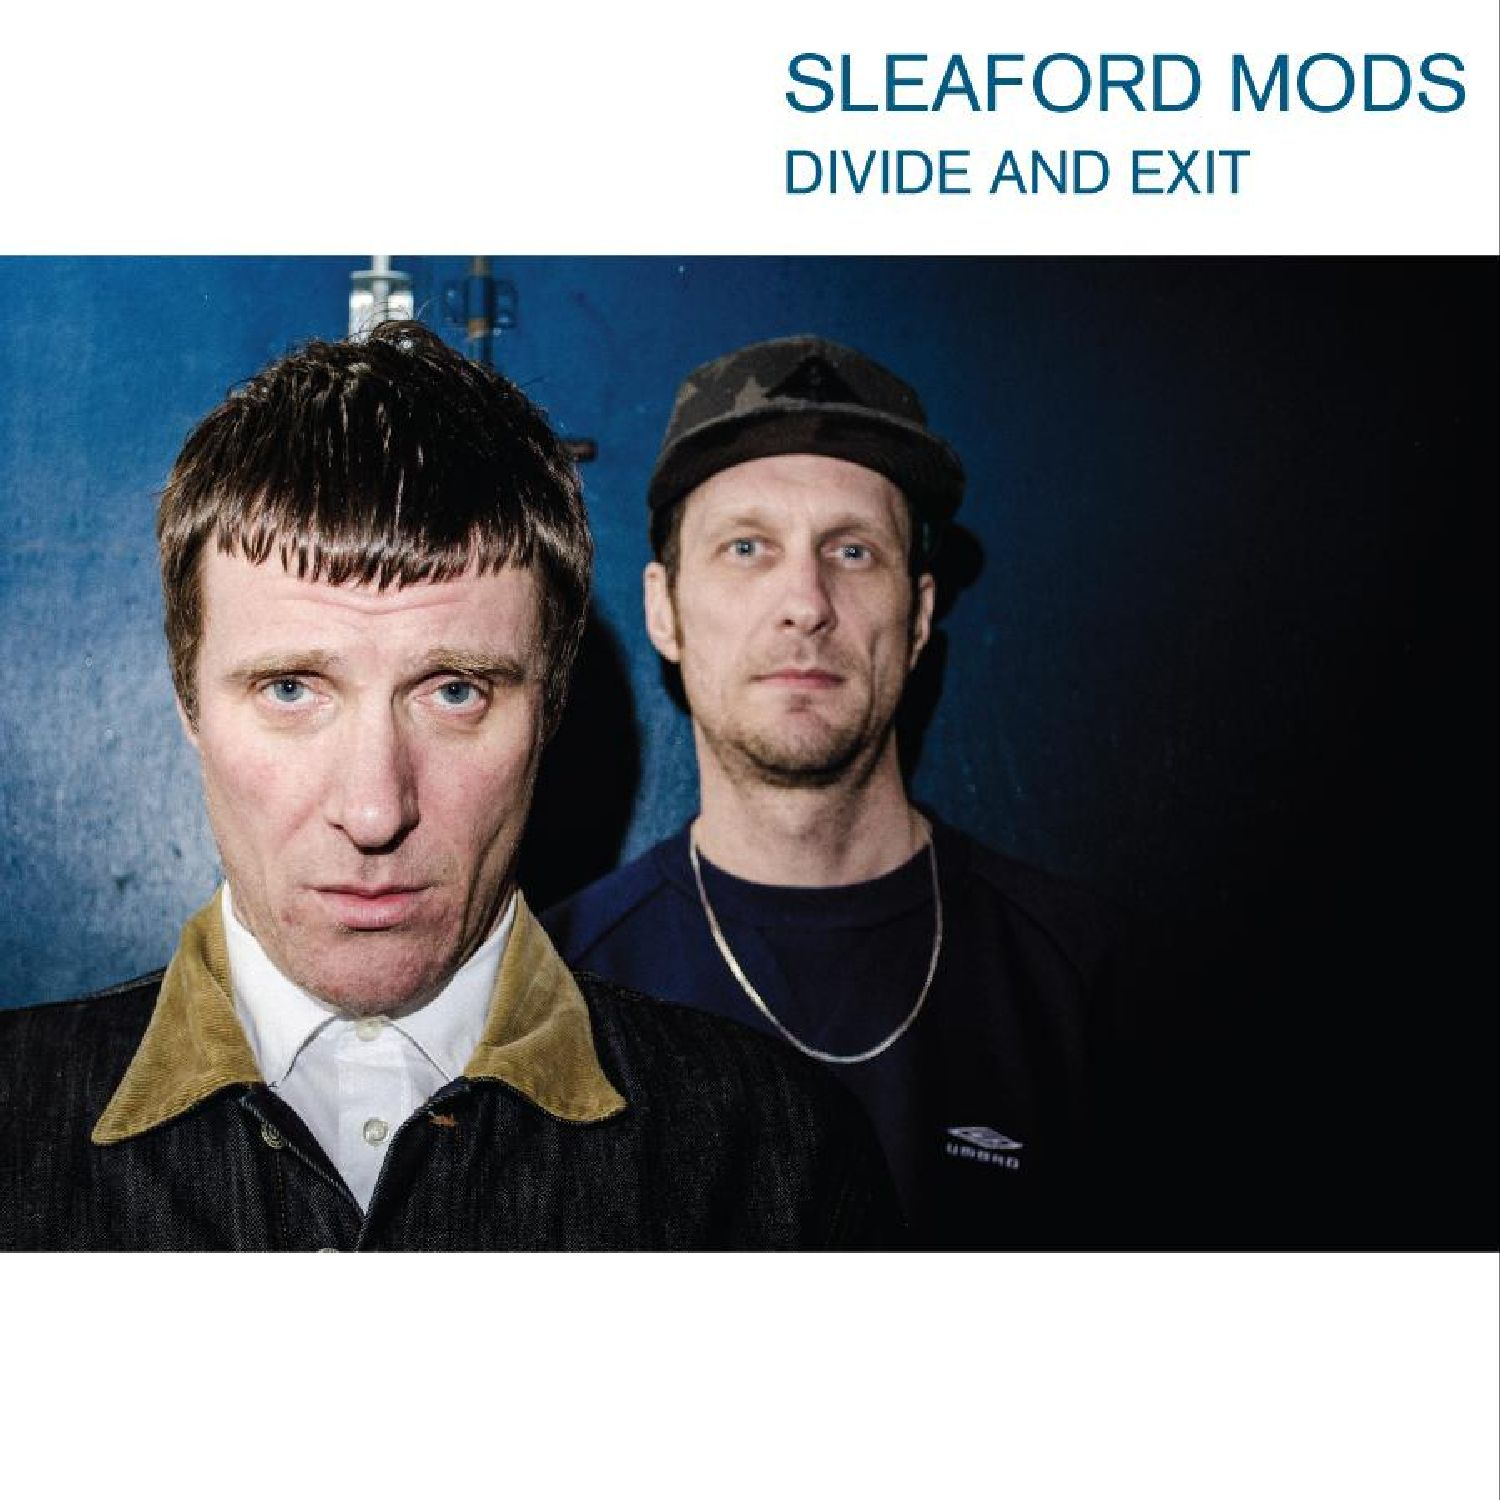 Sleaford Mods - Divide and Exit (10th Anniversary Edition): Vinyl LP